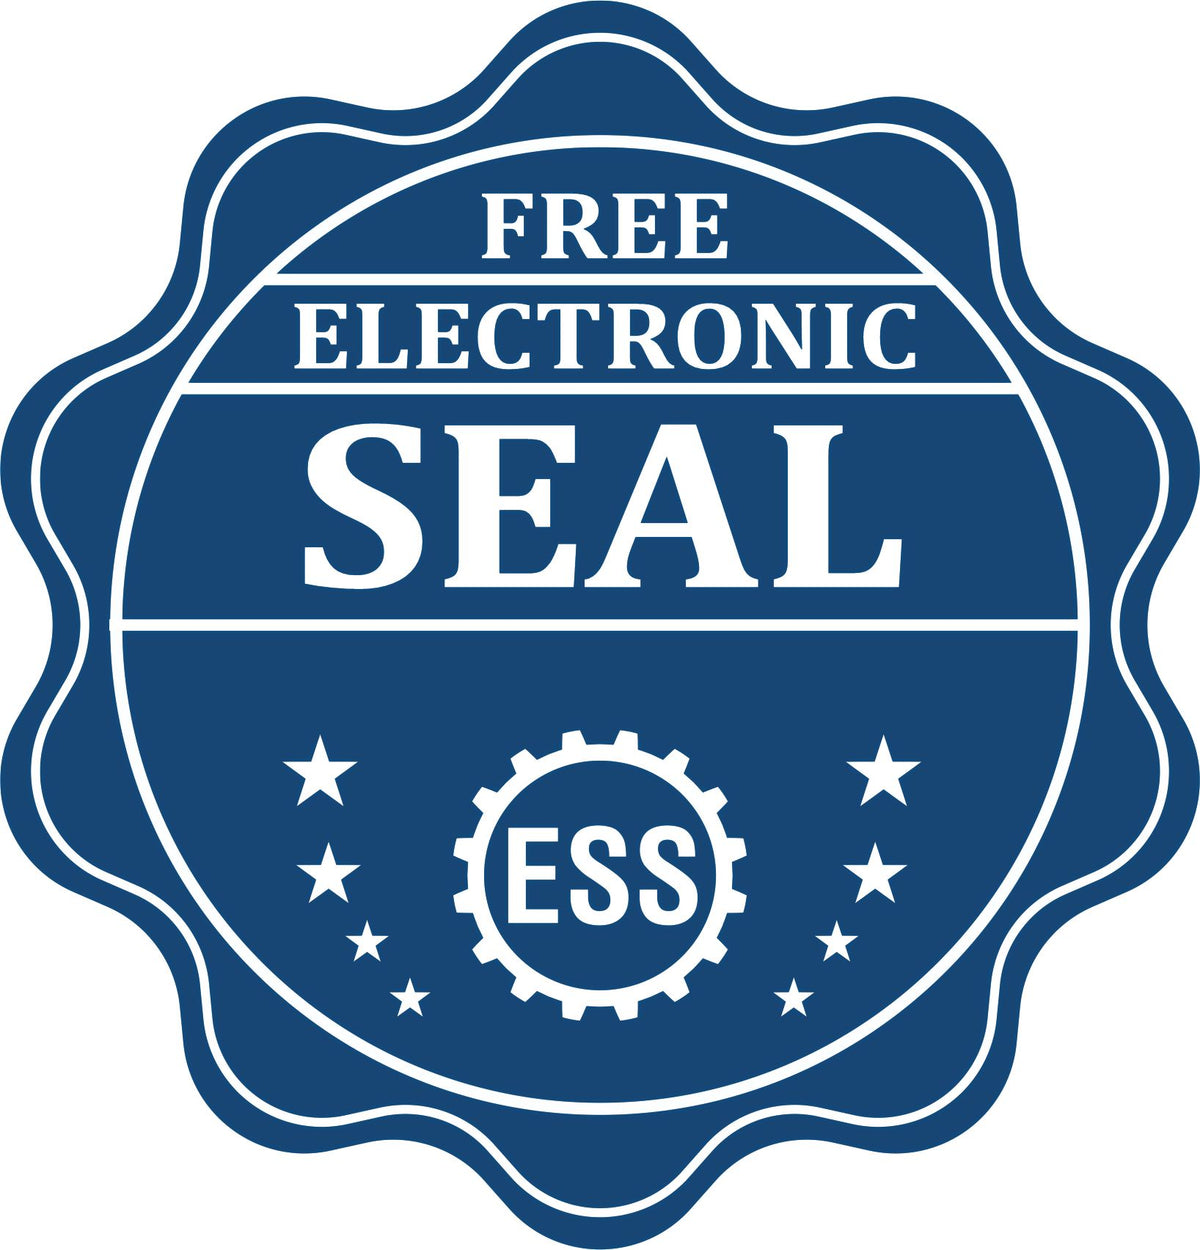 A badge showing a free electronic seal for the Slim Pre-Inked State Seal Notary Stamp for Kentucky with stars and the ESS gear on the emblem.